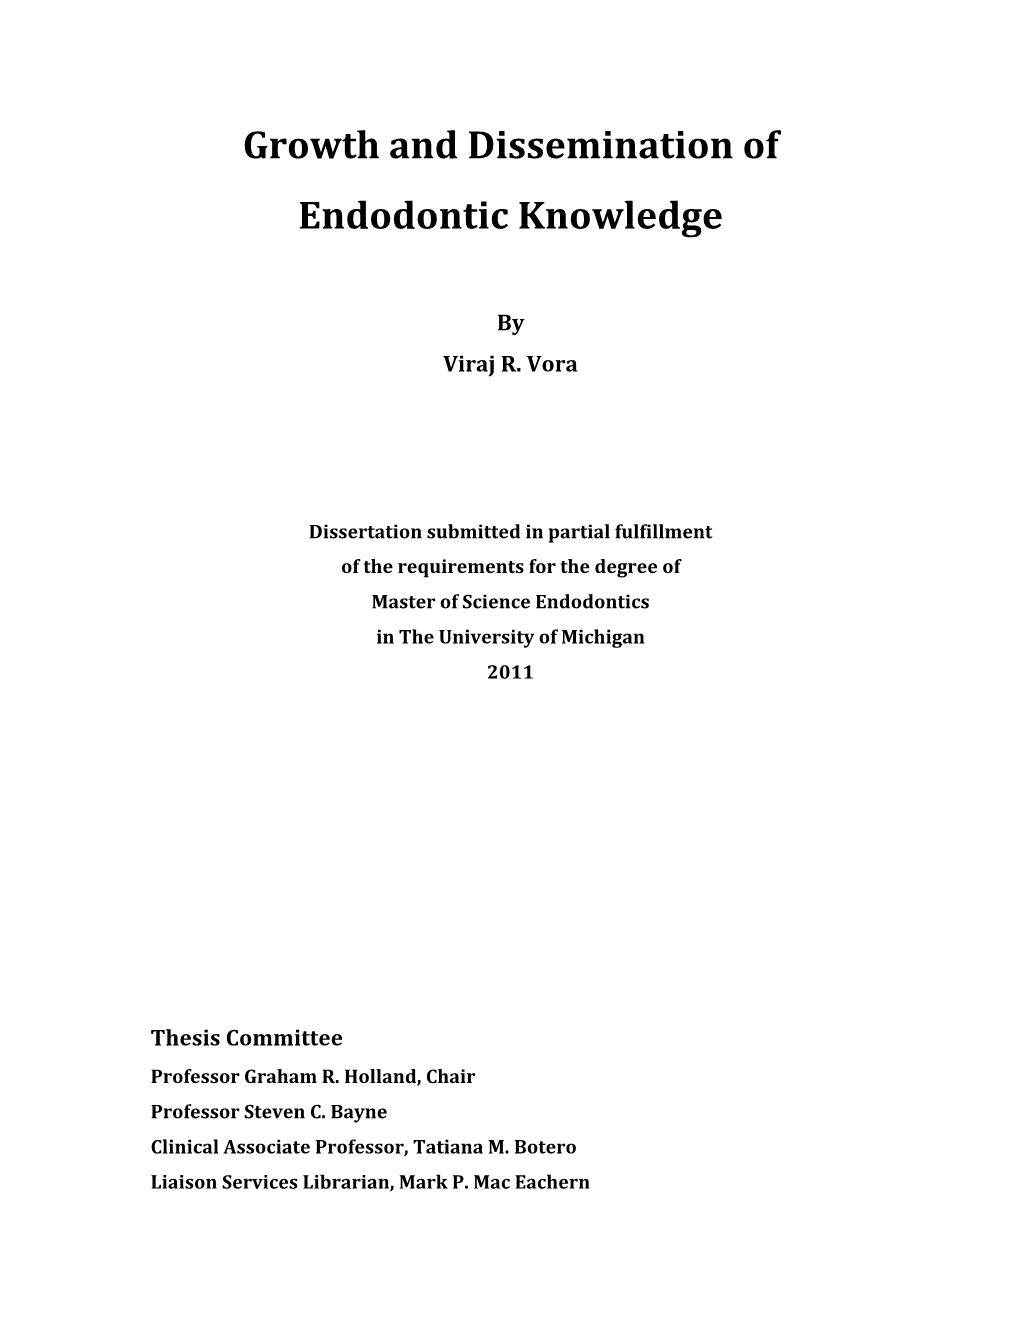 Growth and Dissemination of Endodontic Knowledge